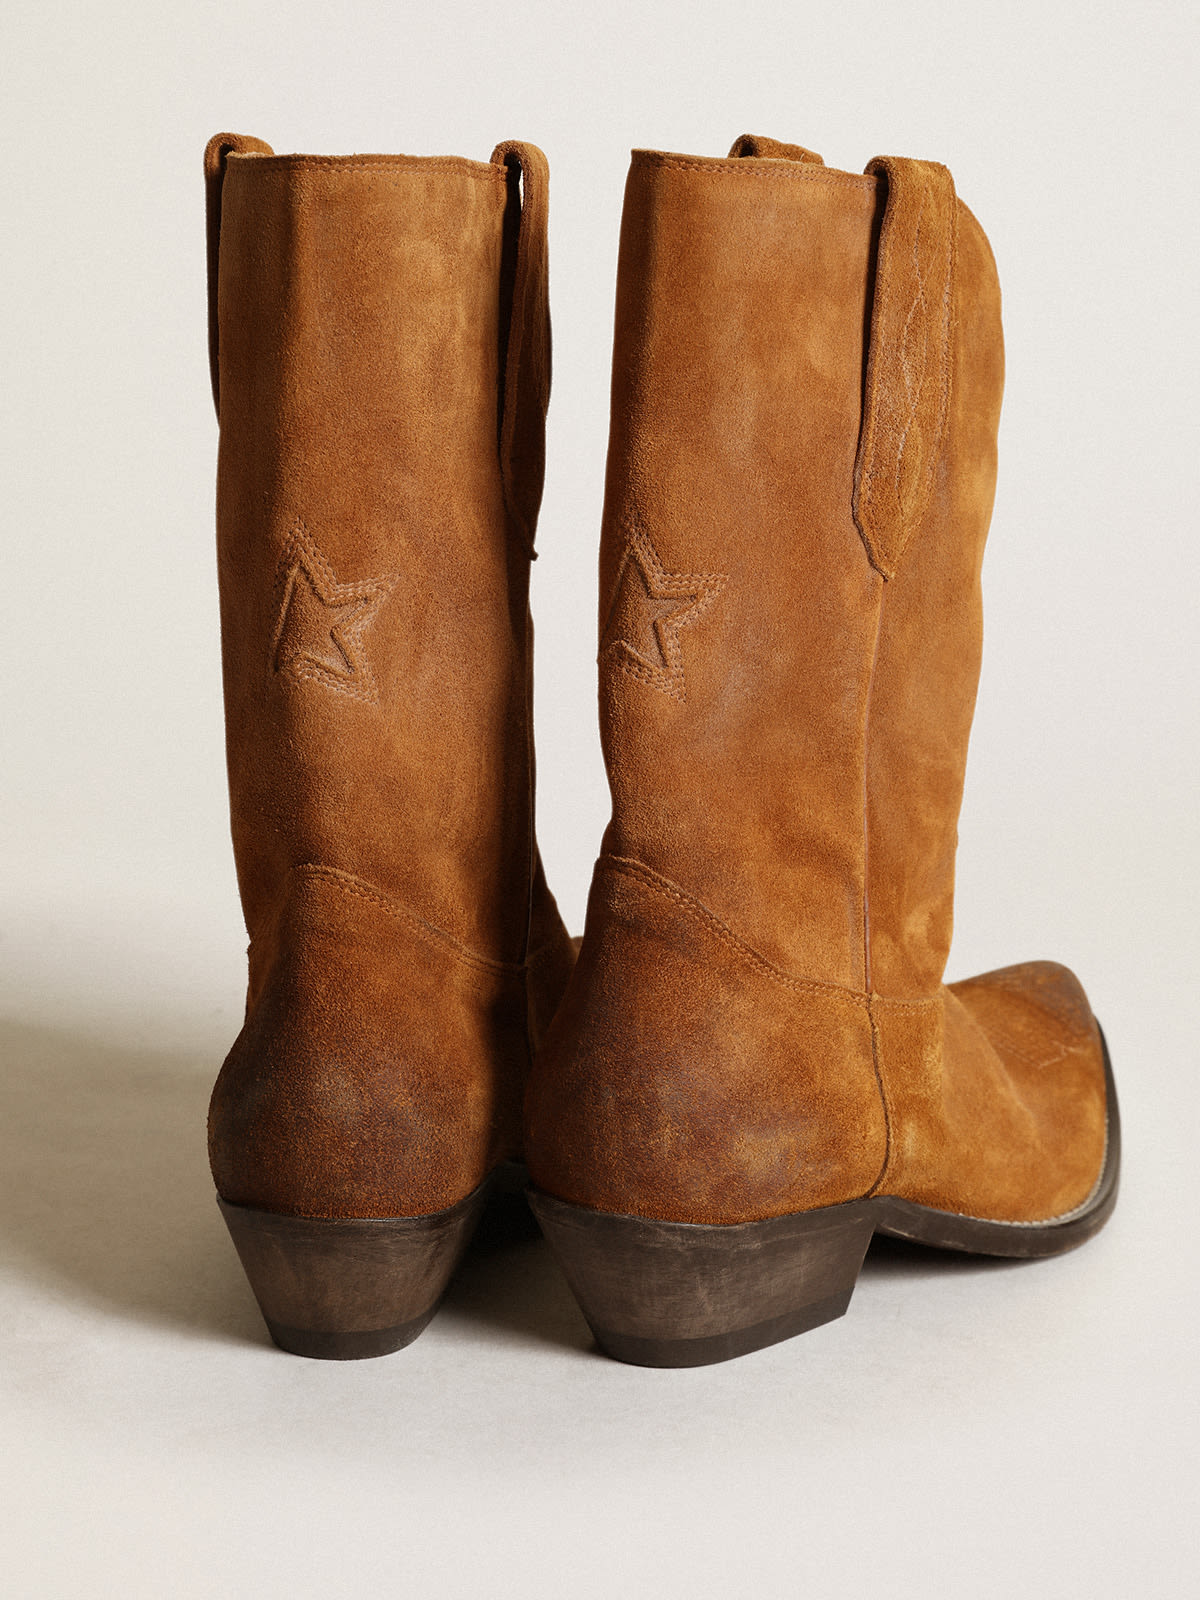 Golden Goose - Low Wish Star boots in tobacco-colored suede with inlay star in 